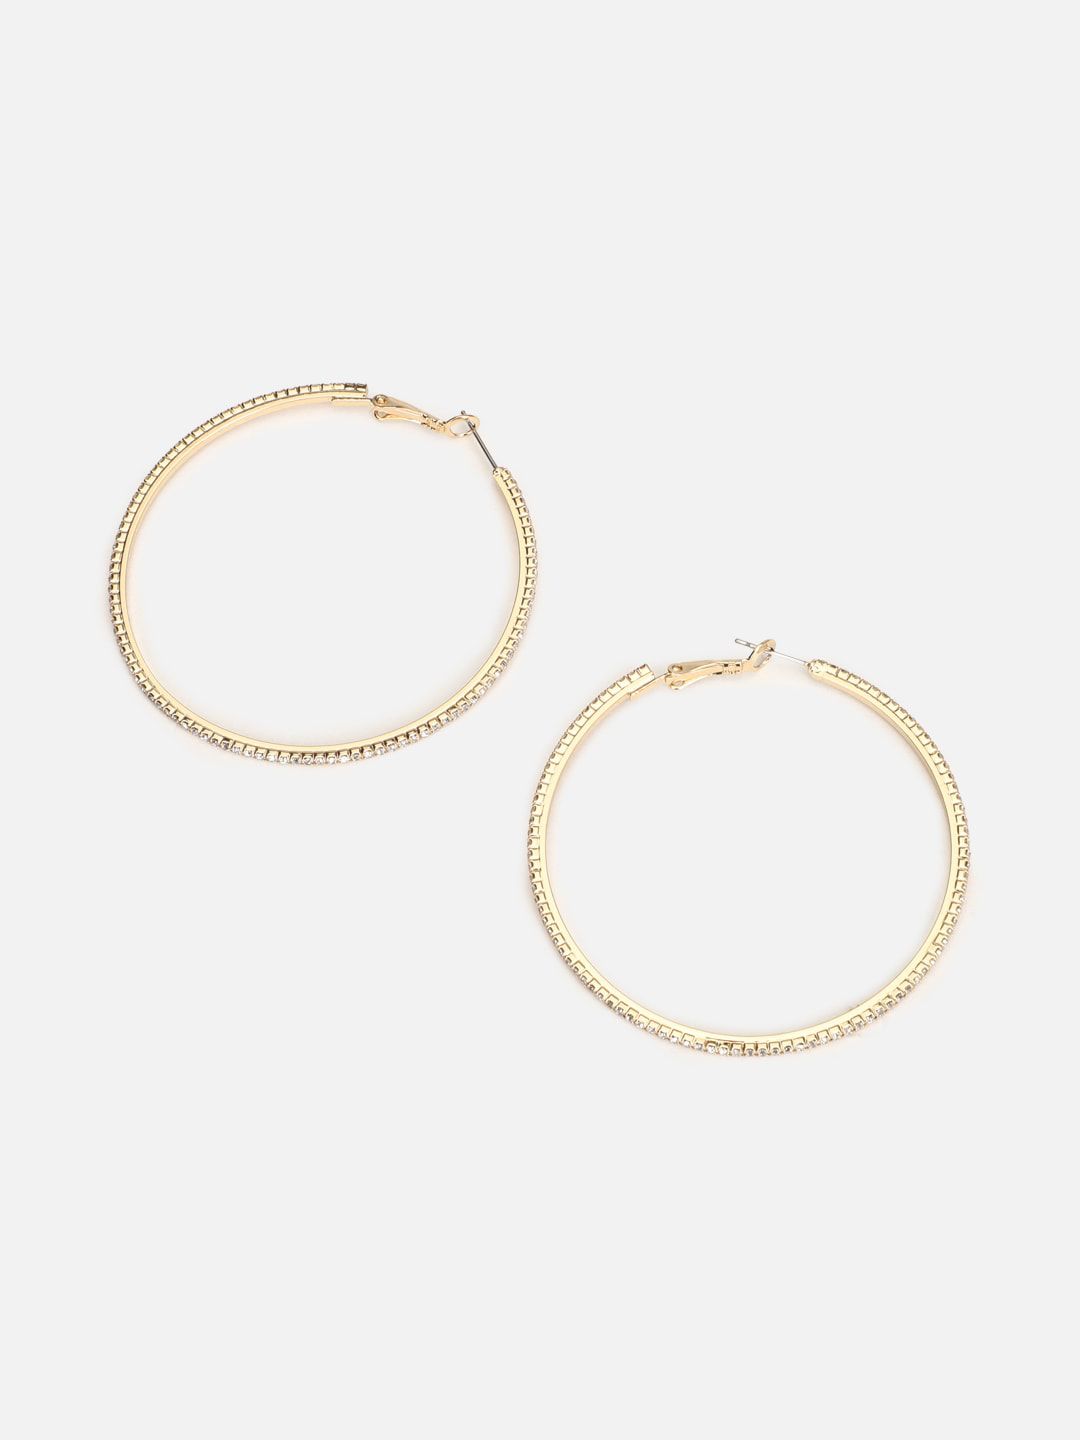 FOREVER 21 Gold-Toned Contemporary Hoop Earrings Price in India